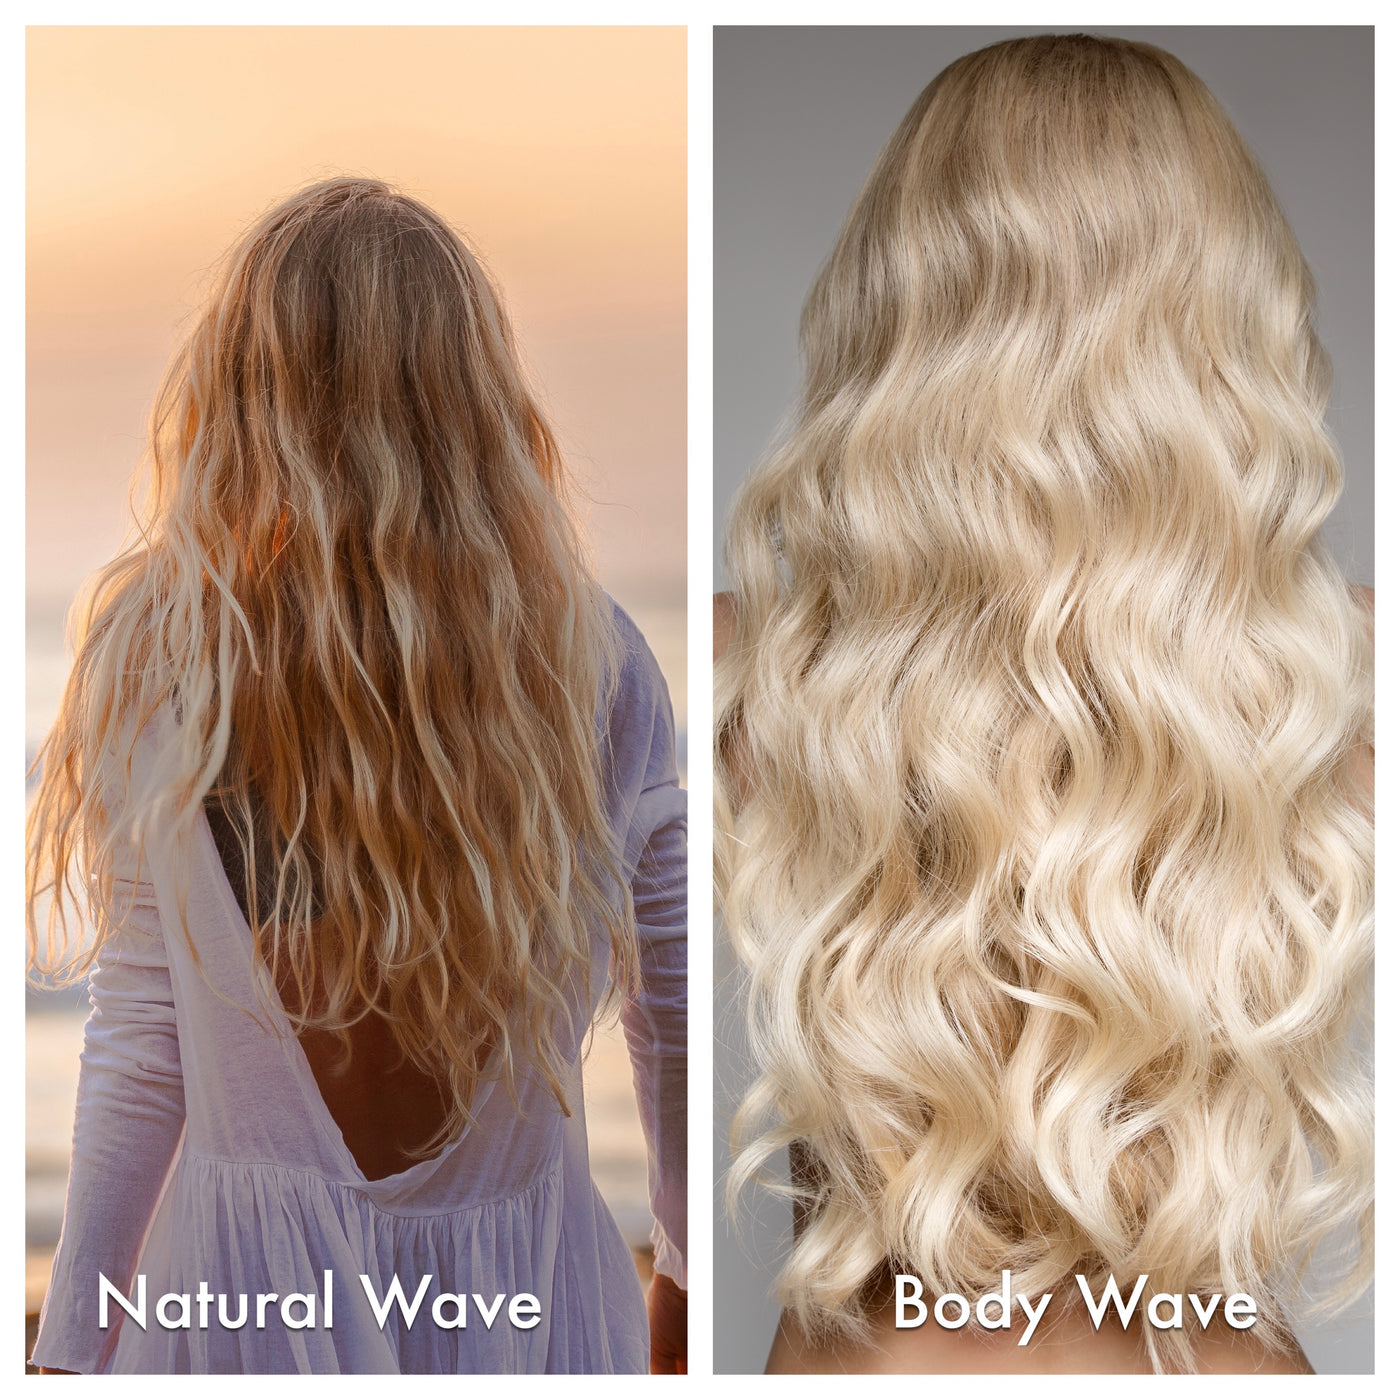 LUXE Wave Weft Hair Extensions | P4/8 - Slay